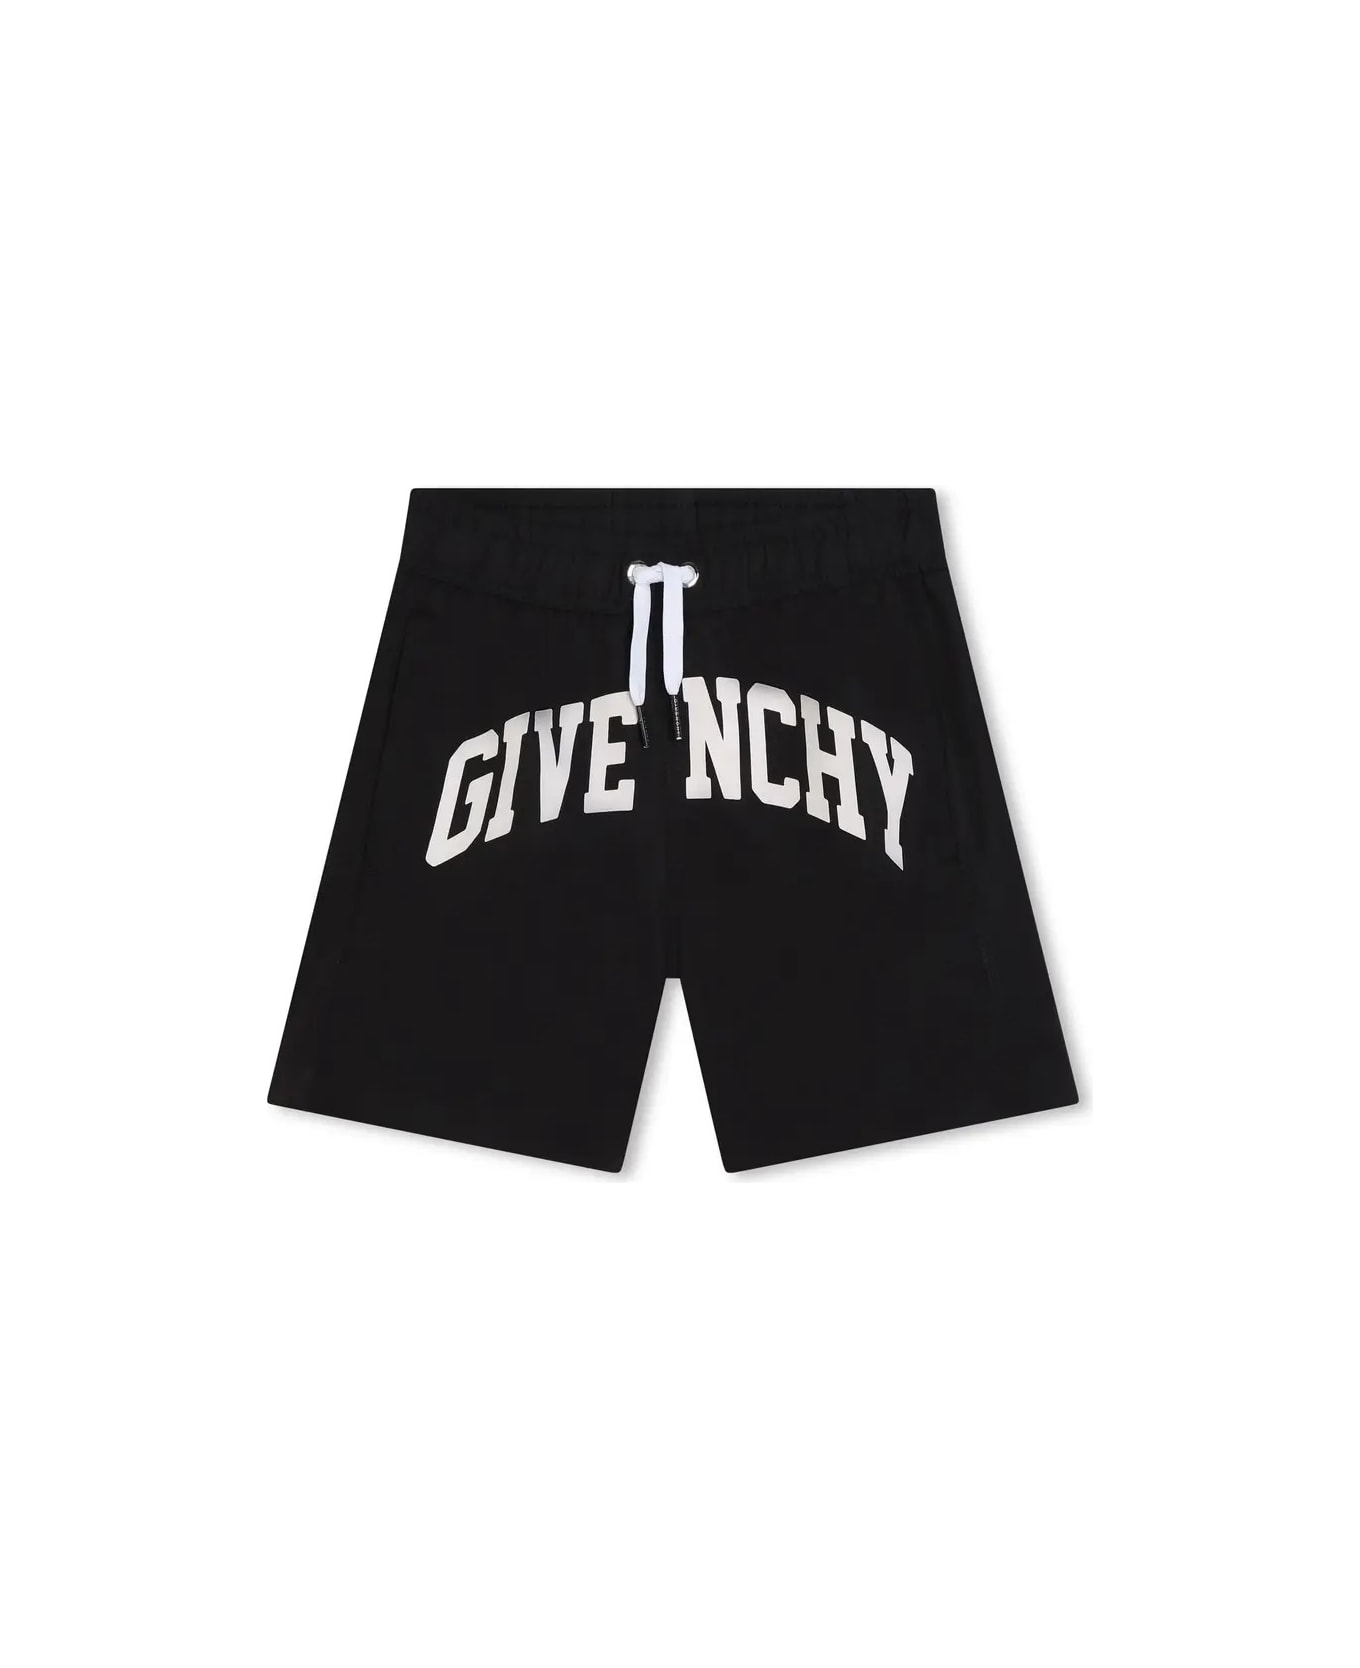 Givenchy Black Swimwear With Arched Logo - Black